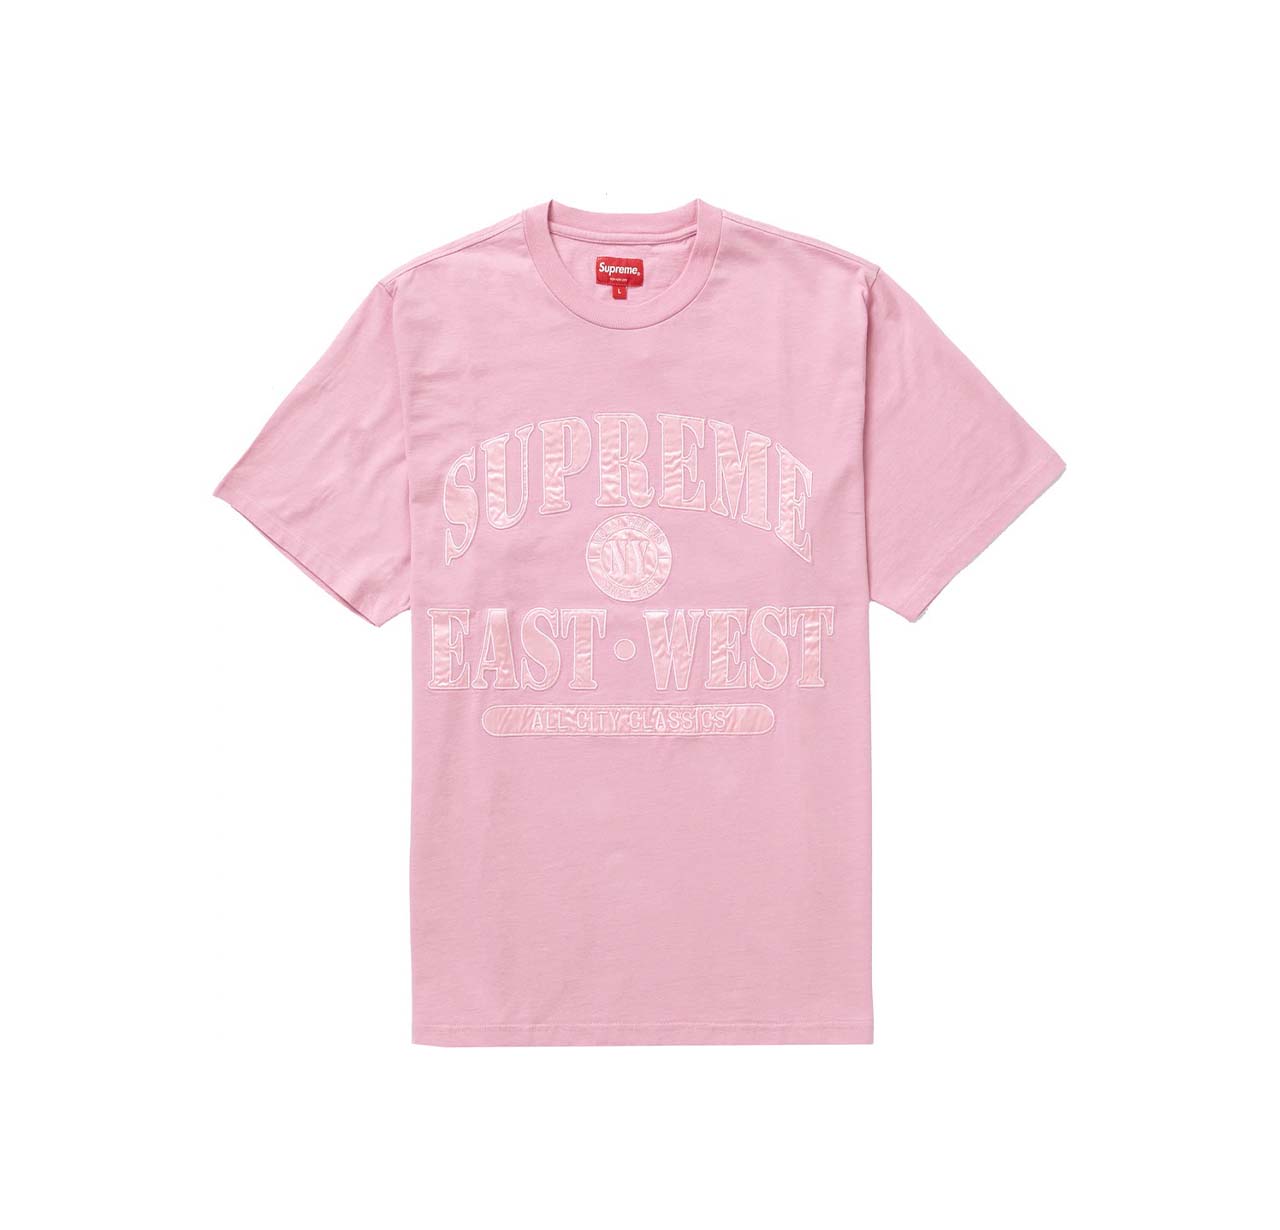 Supreme east west ss top Pink